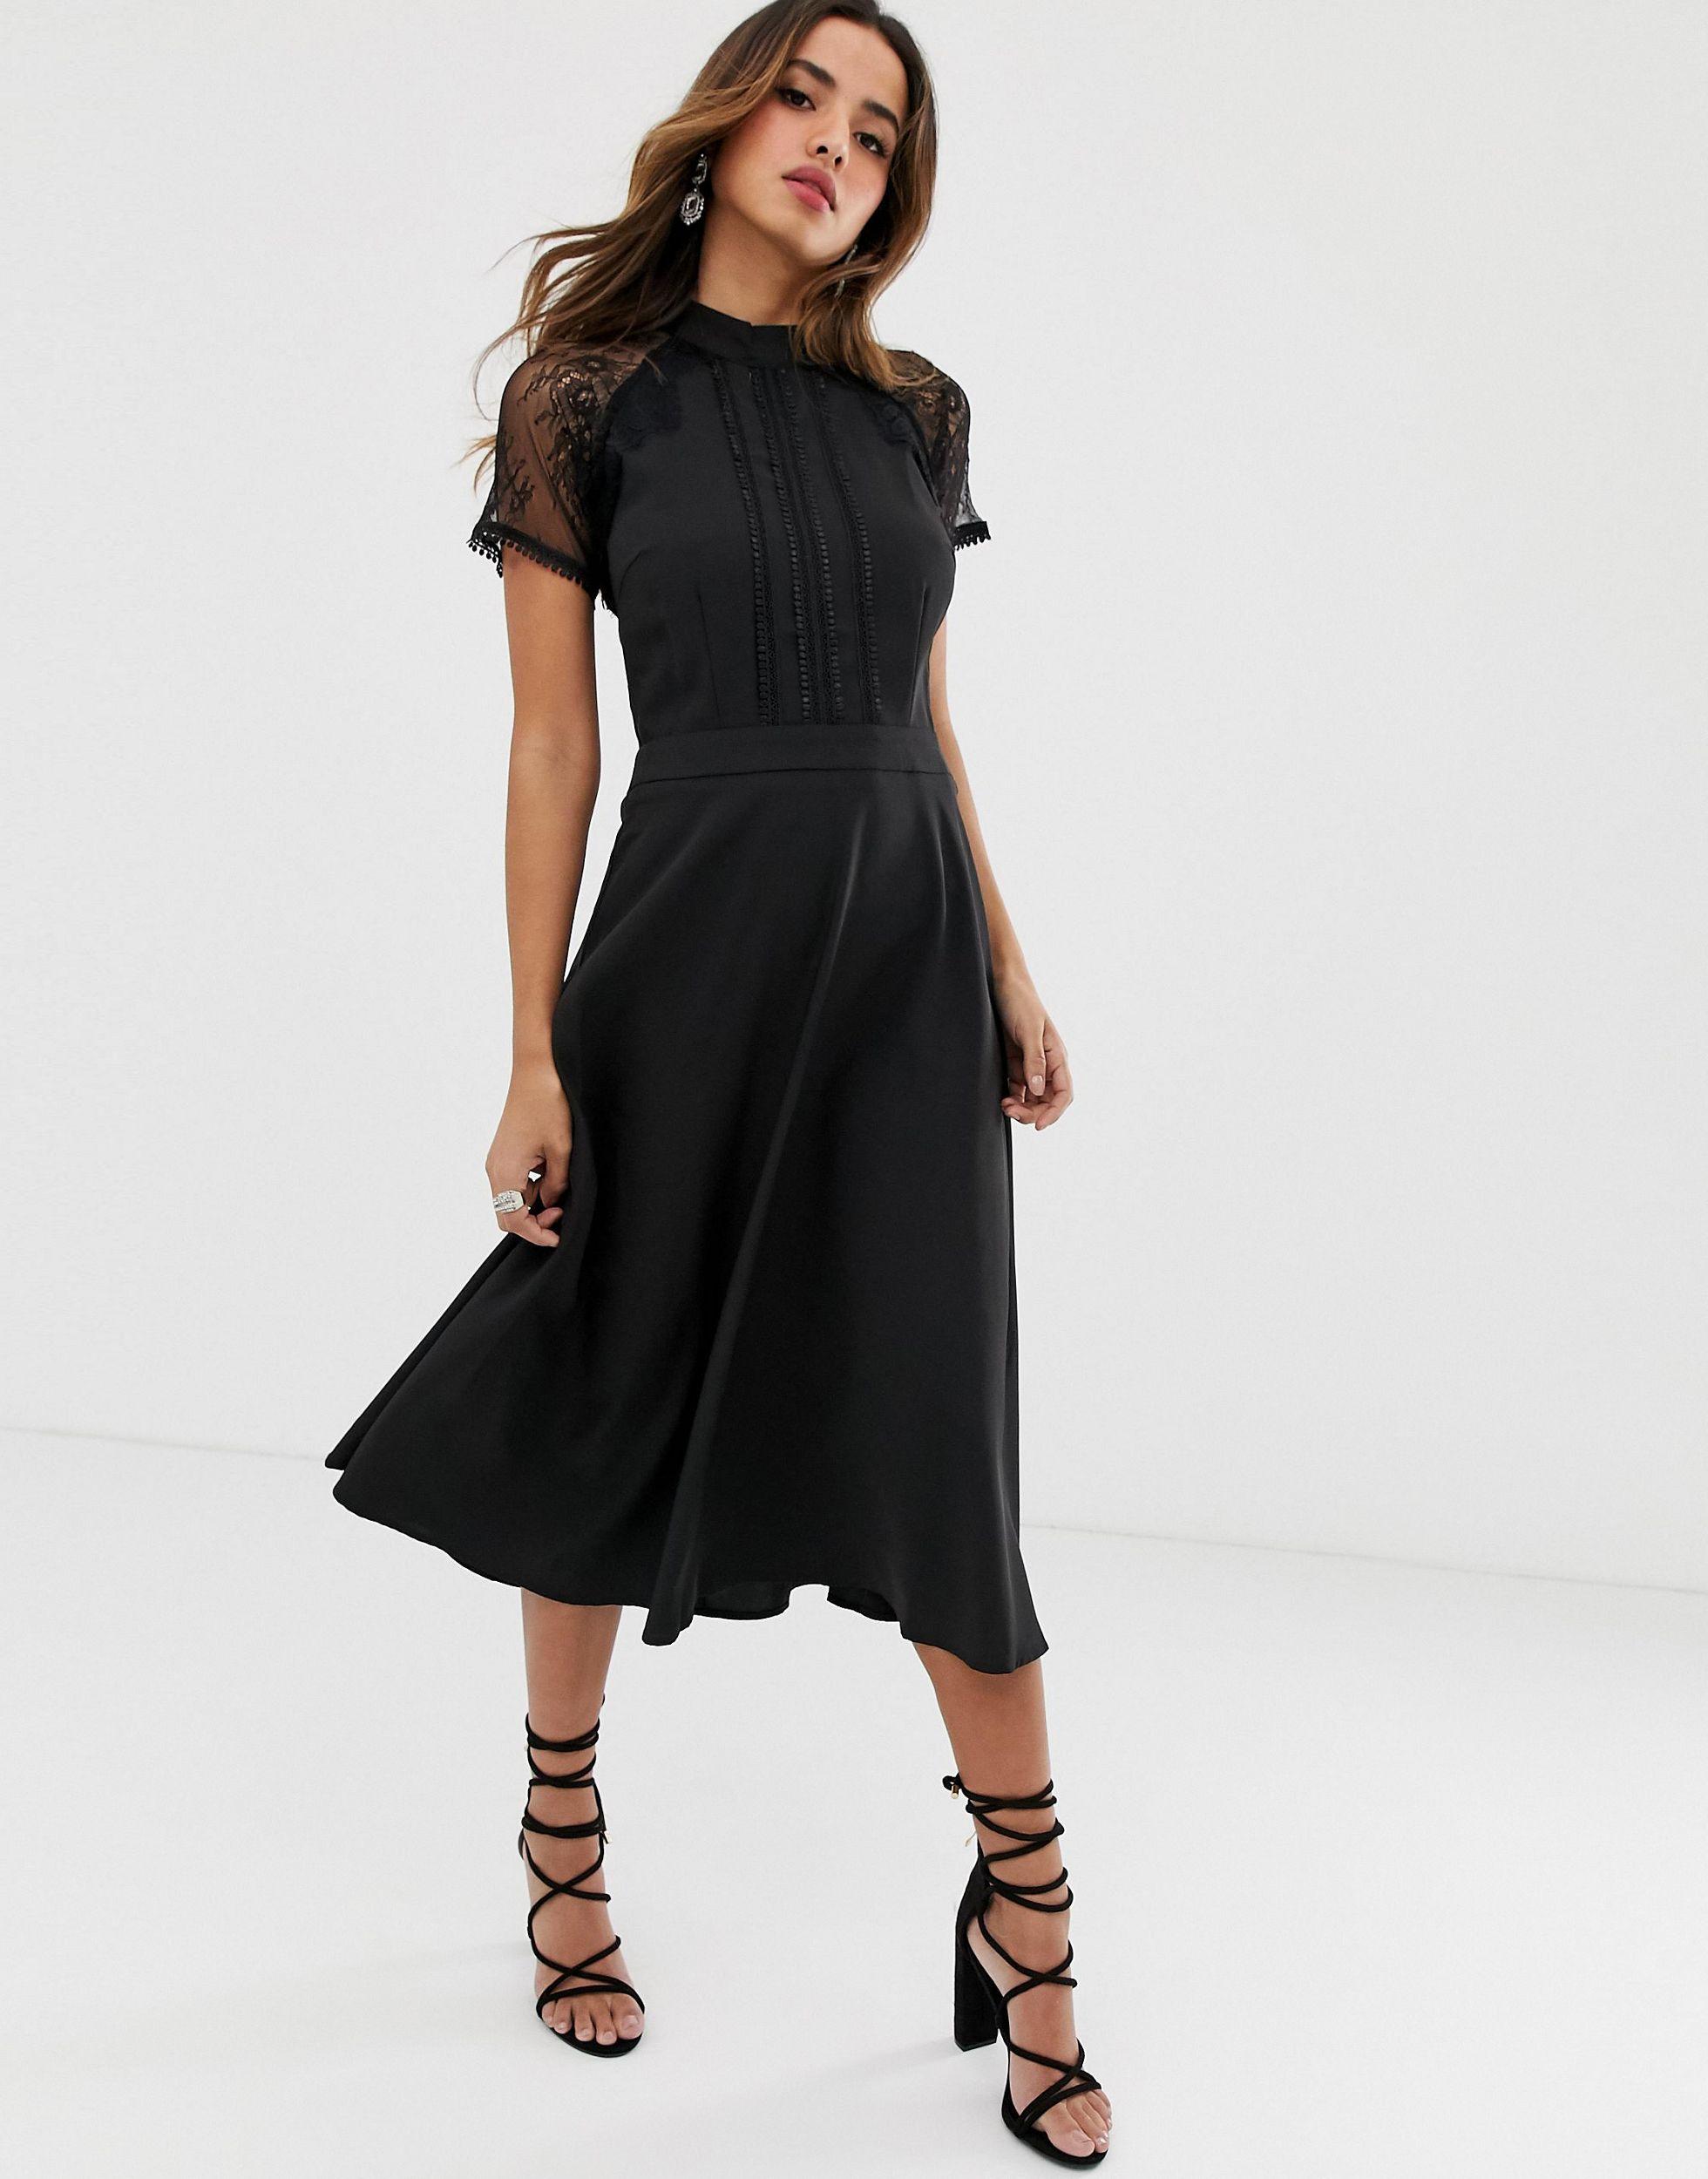 Black Dress Styles for the Ultimate Black Dress Wardrobe – Top Reviews ...